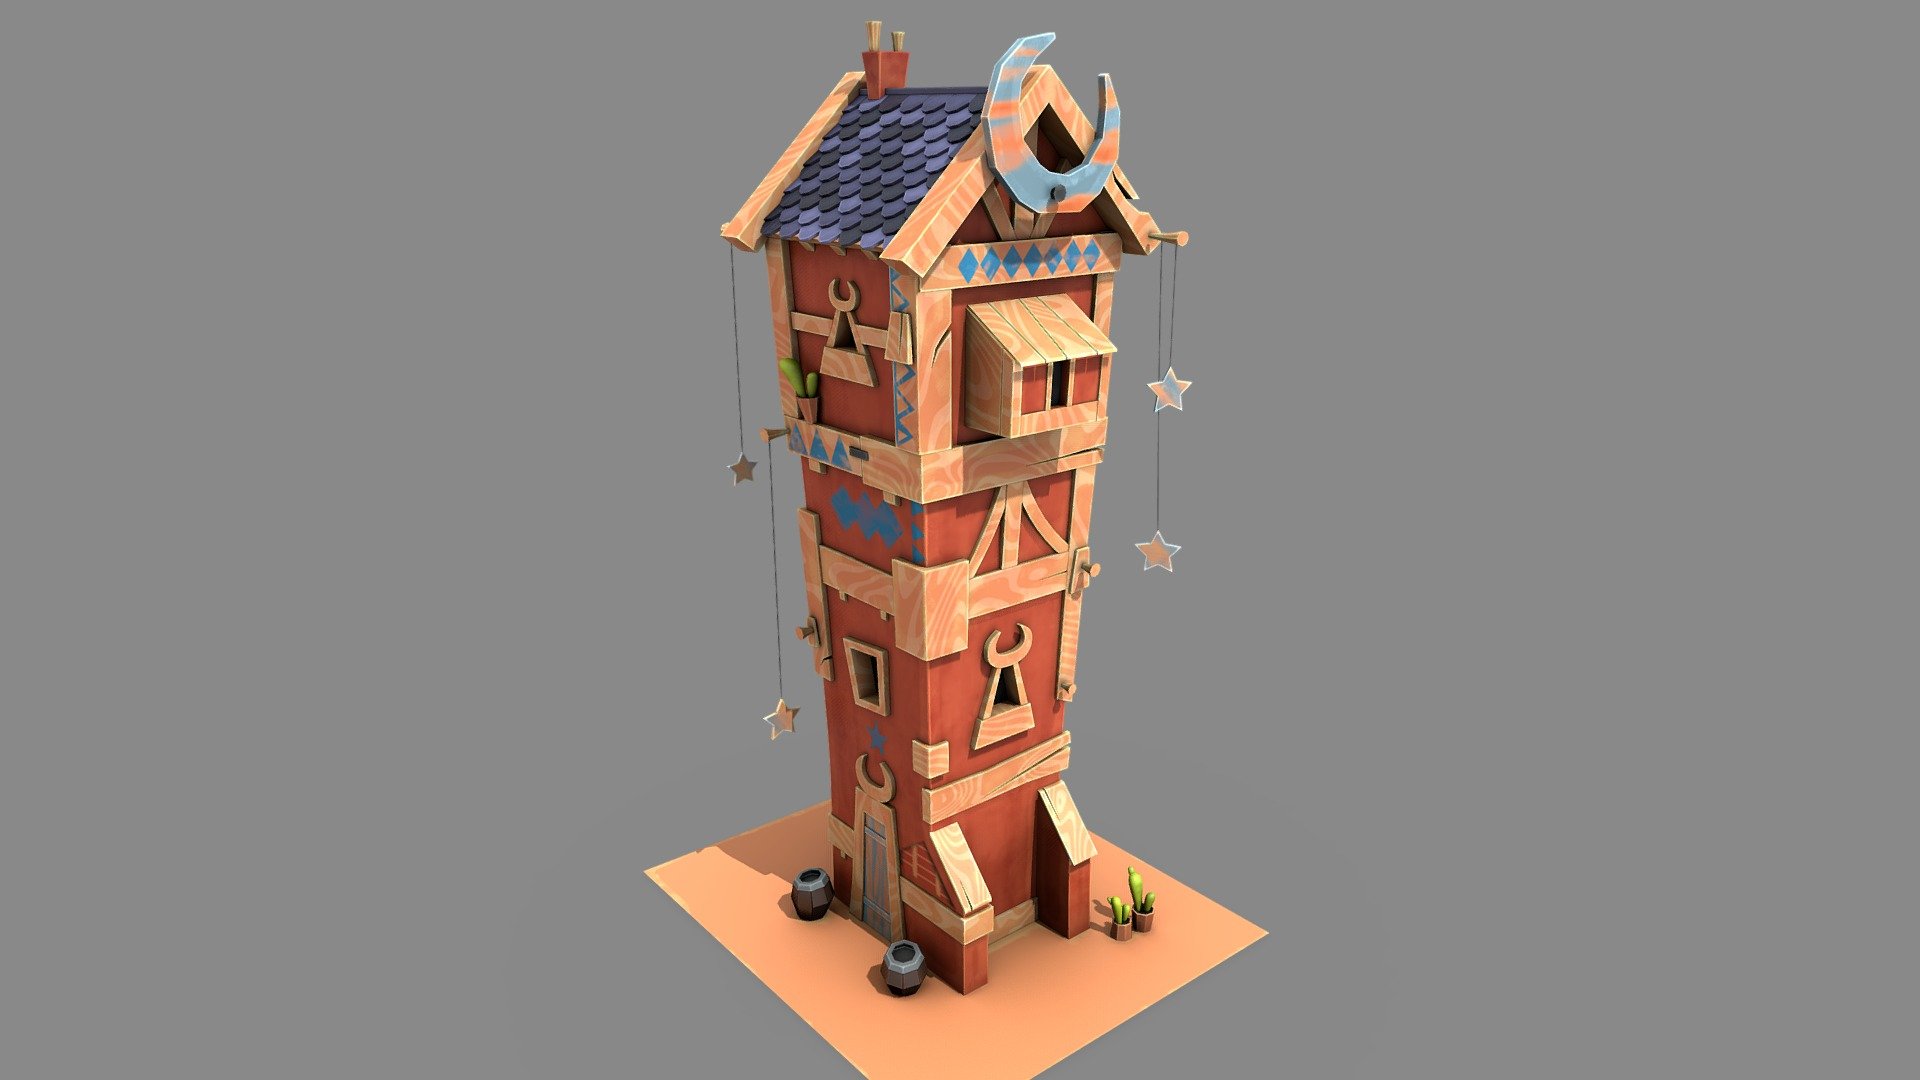 It's a 3D model of a MoonHouse modeling in 3DsMax and texturing in Substance Painter from a educational project.
Concept Art: Charlène Le Scanff -
https://www.artstation.com/artwork/moon-house
Model: Arnau Morilla | https://www.artstation.com/artwork/oA12wq
Please contact me if there are any issues 3d model